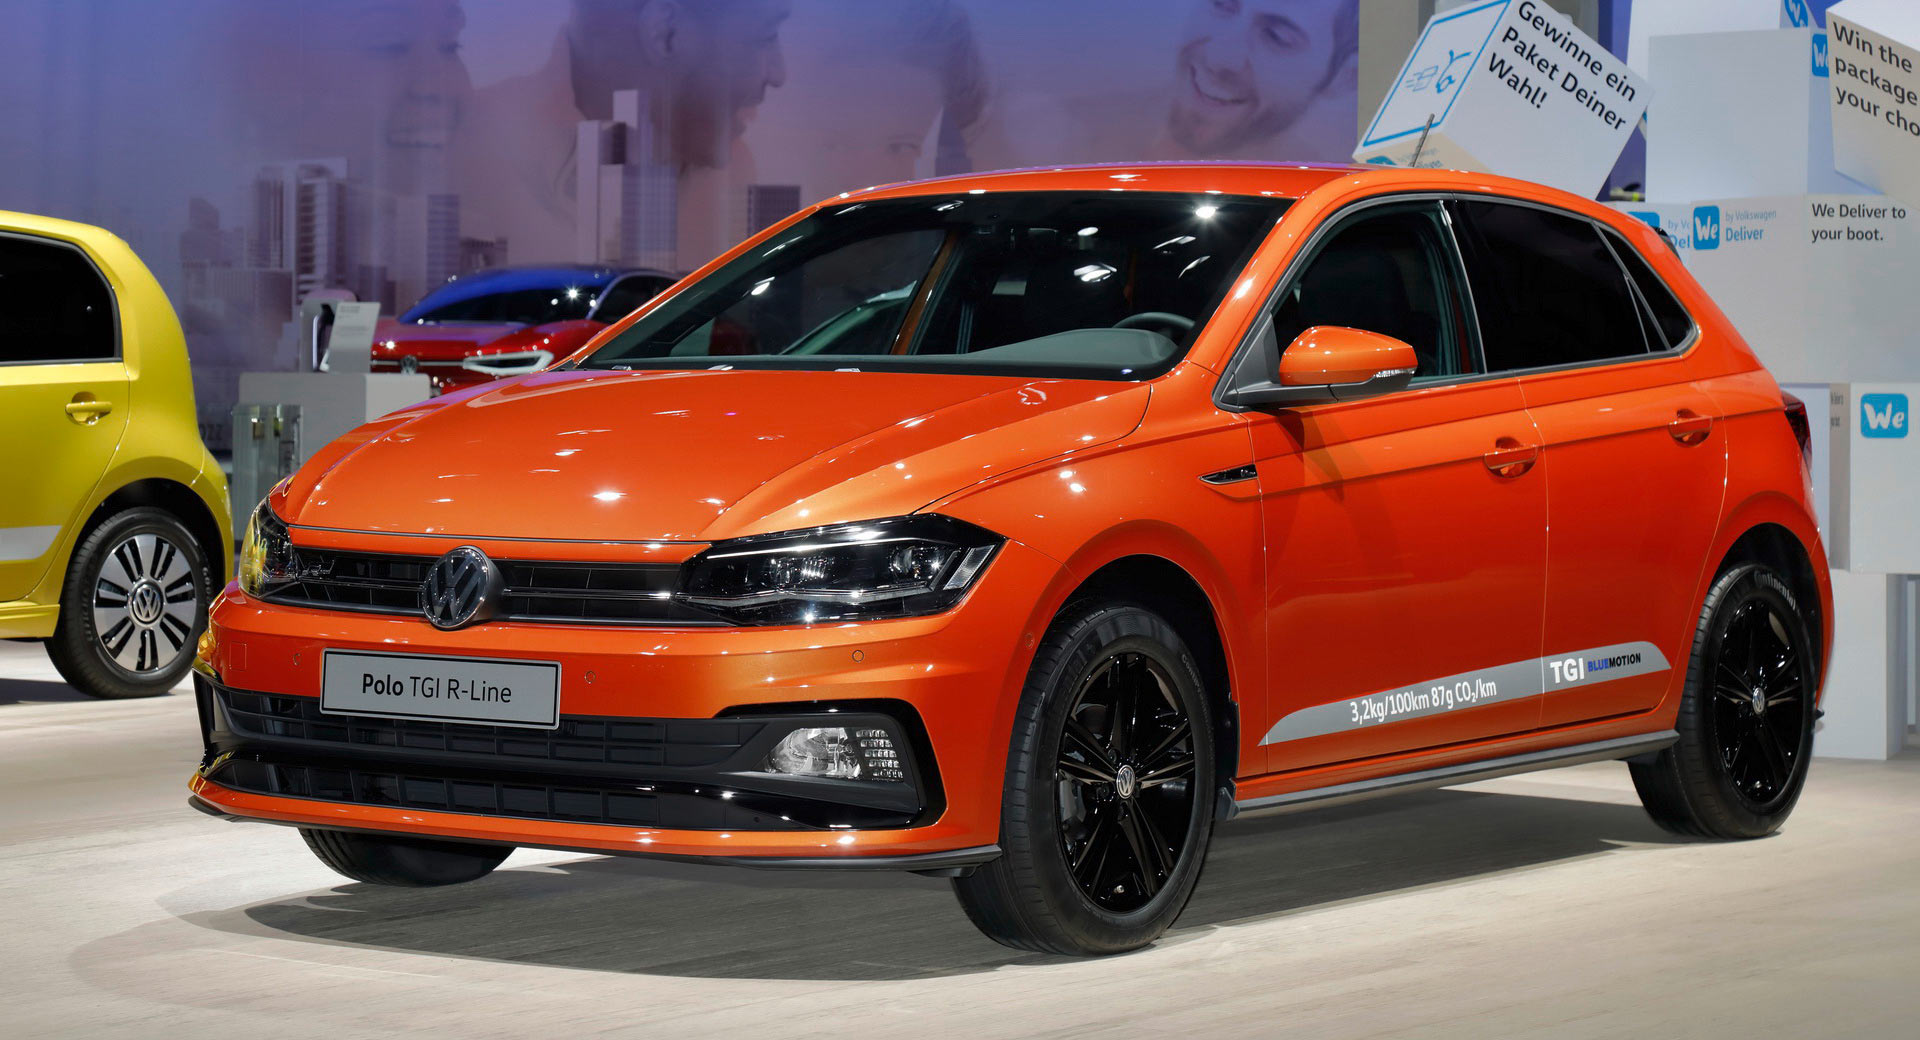 Dierentuin lint Beheren CNG-Powered VW Polo And Golf TGI Gain An Extra Tank For Longer Range |  Carscoops